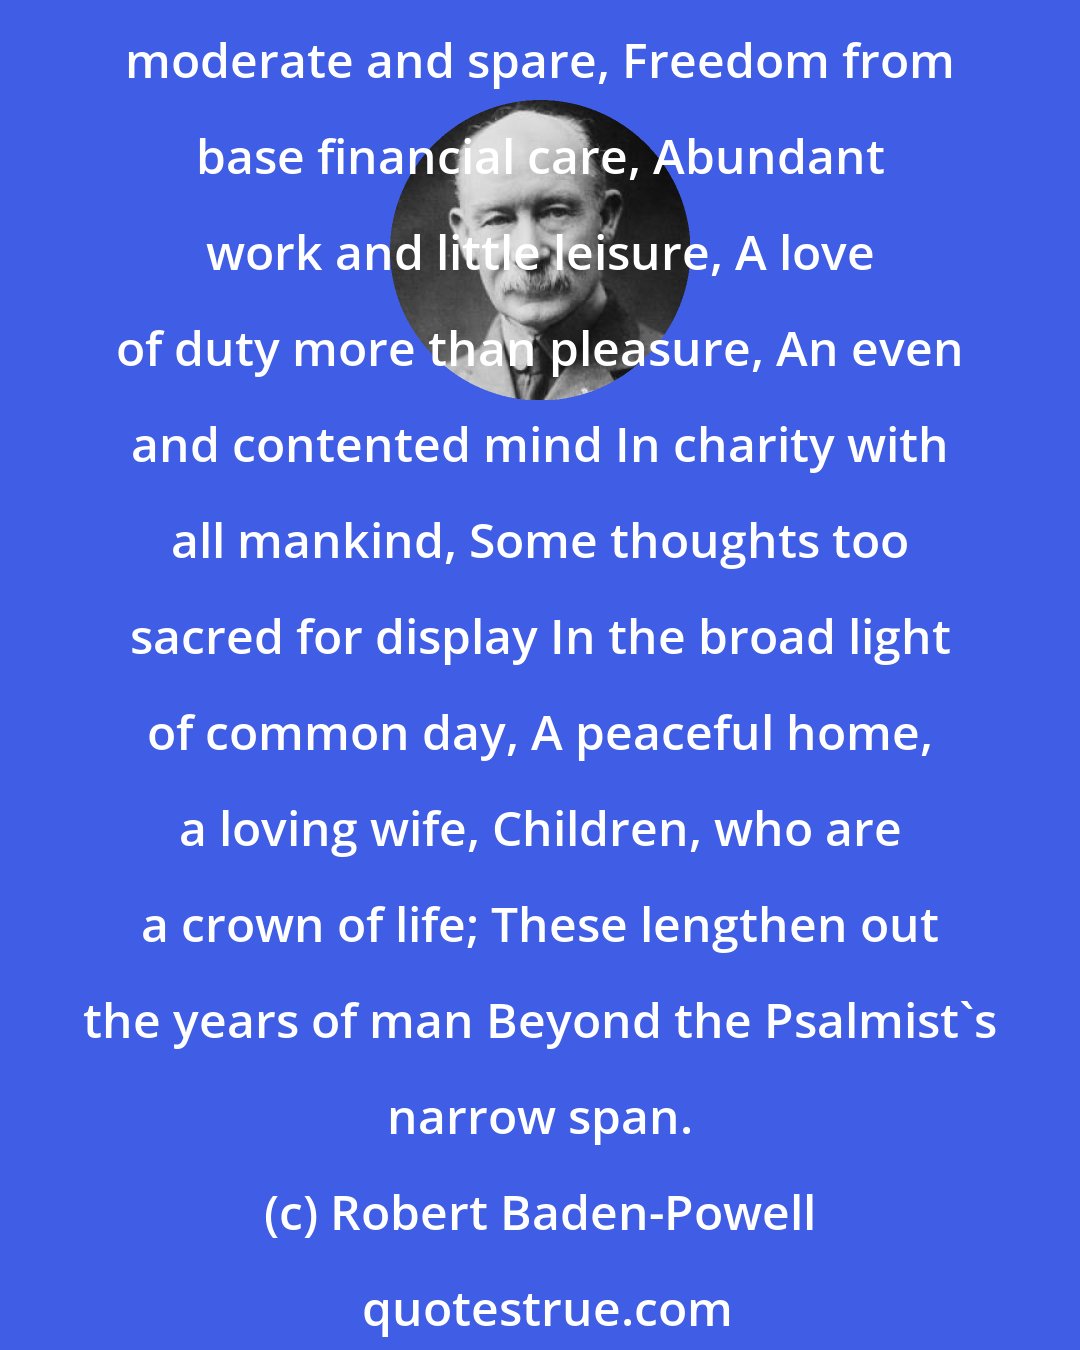 Robert Baden-Powell: Possibly the best suggestion in condensed form, as to how to live, was given by my old Headmaster, Dr. Haig Brown, in 1904, when he wrote his Recipe for Old Age. A diet moderate and spare, Freedom from base financial care, Abundant work and little leisure, A love of duty more than pleasure, An even and contented mind In charity with all mankind, Some thoughts too sacred for display In the broad light of common day, A peaceful home, a loving wife, Children, who are a crown of life; These lengthen out the years of man Beyond the Psalmist's narrow span.